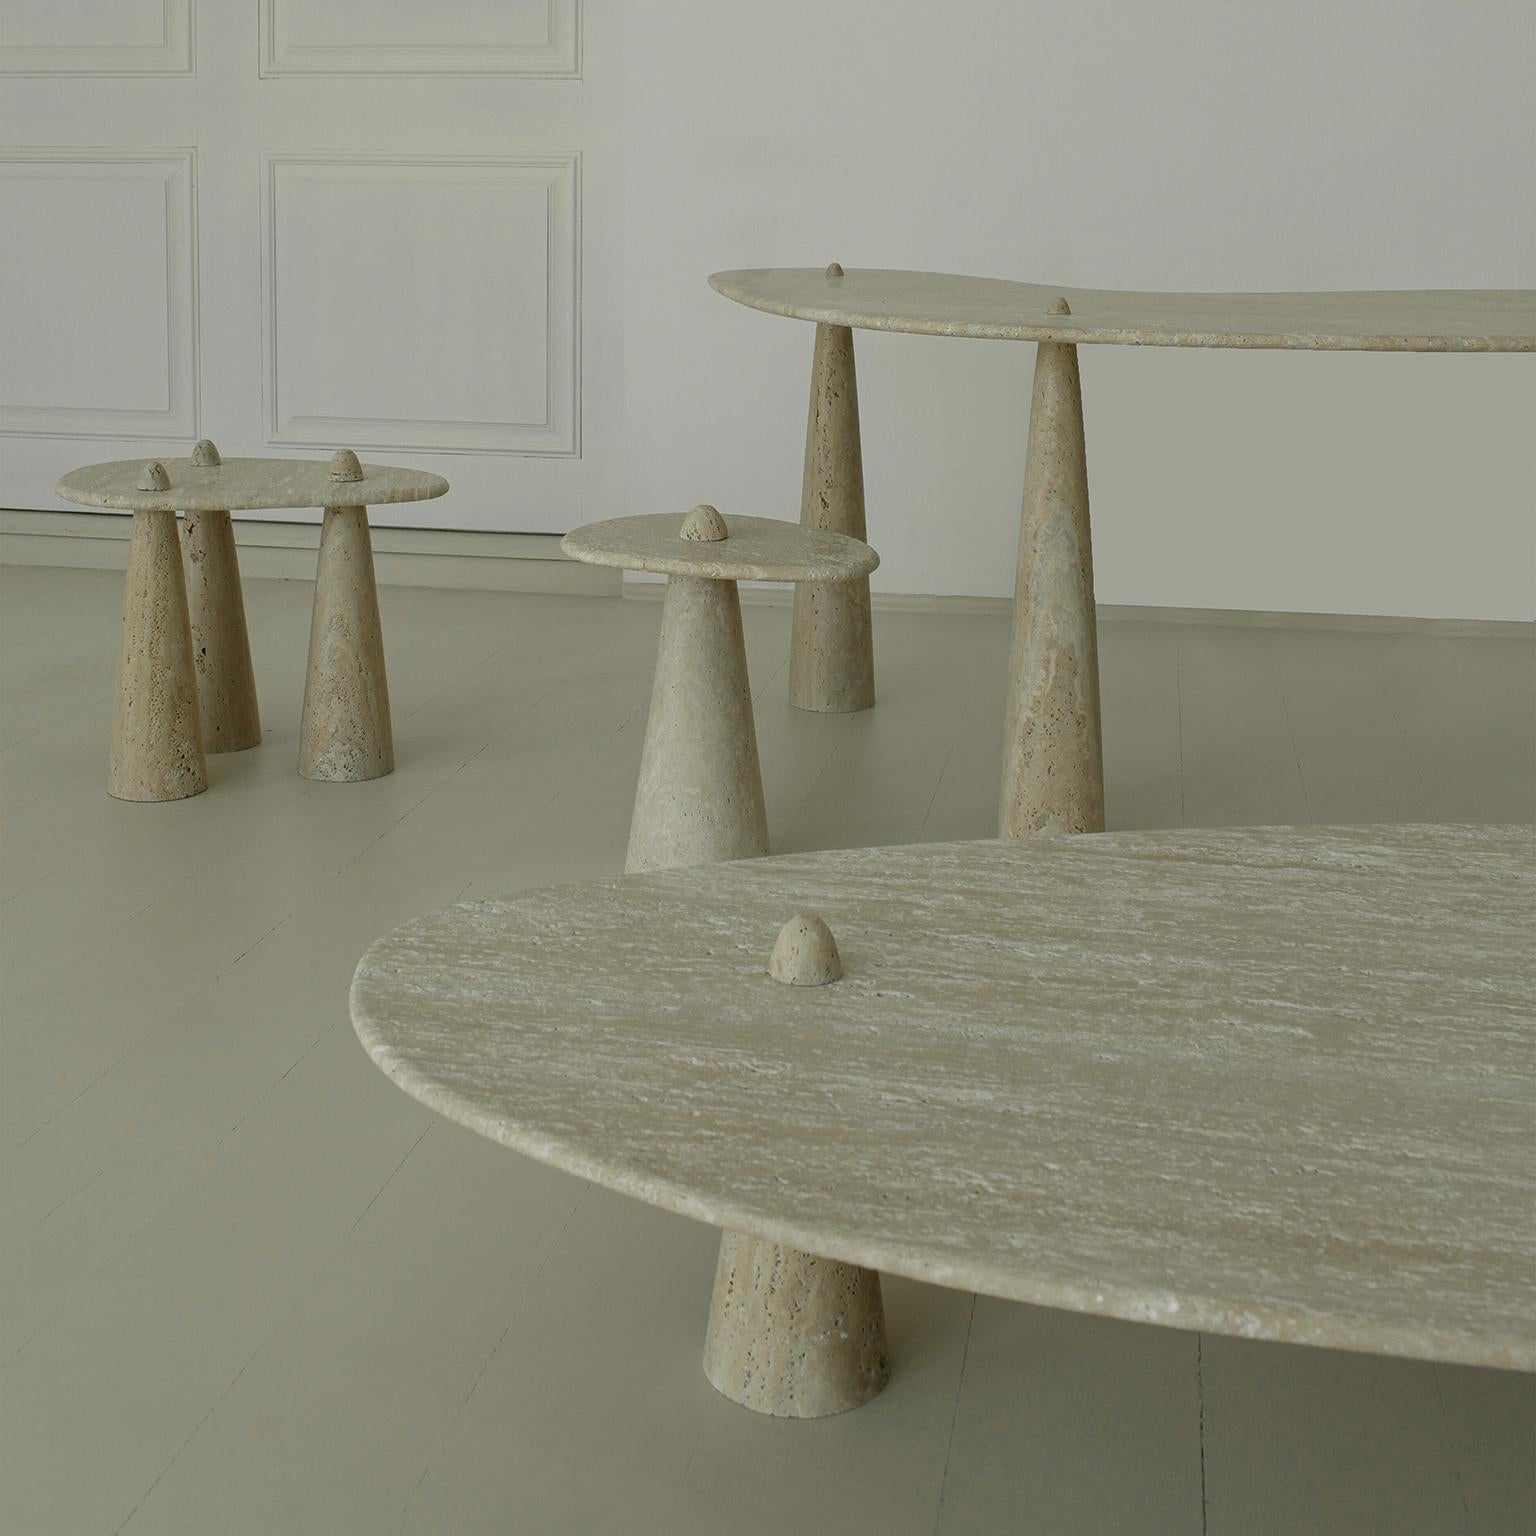 This contemporary tripod side table was meticulously handmade by master artisans one piece at a time. It is therefore quite difficult, if not impossible to make identical items. The projects are based on a contemporary appropriation of traditional